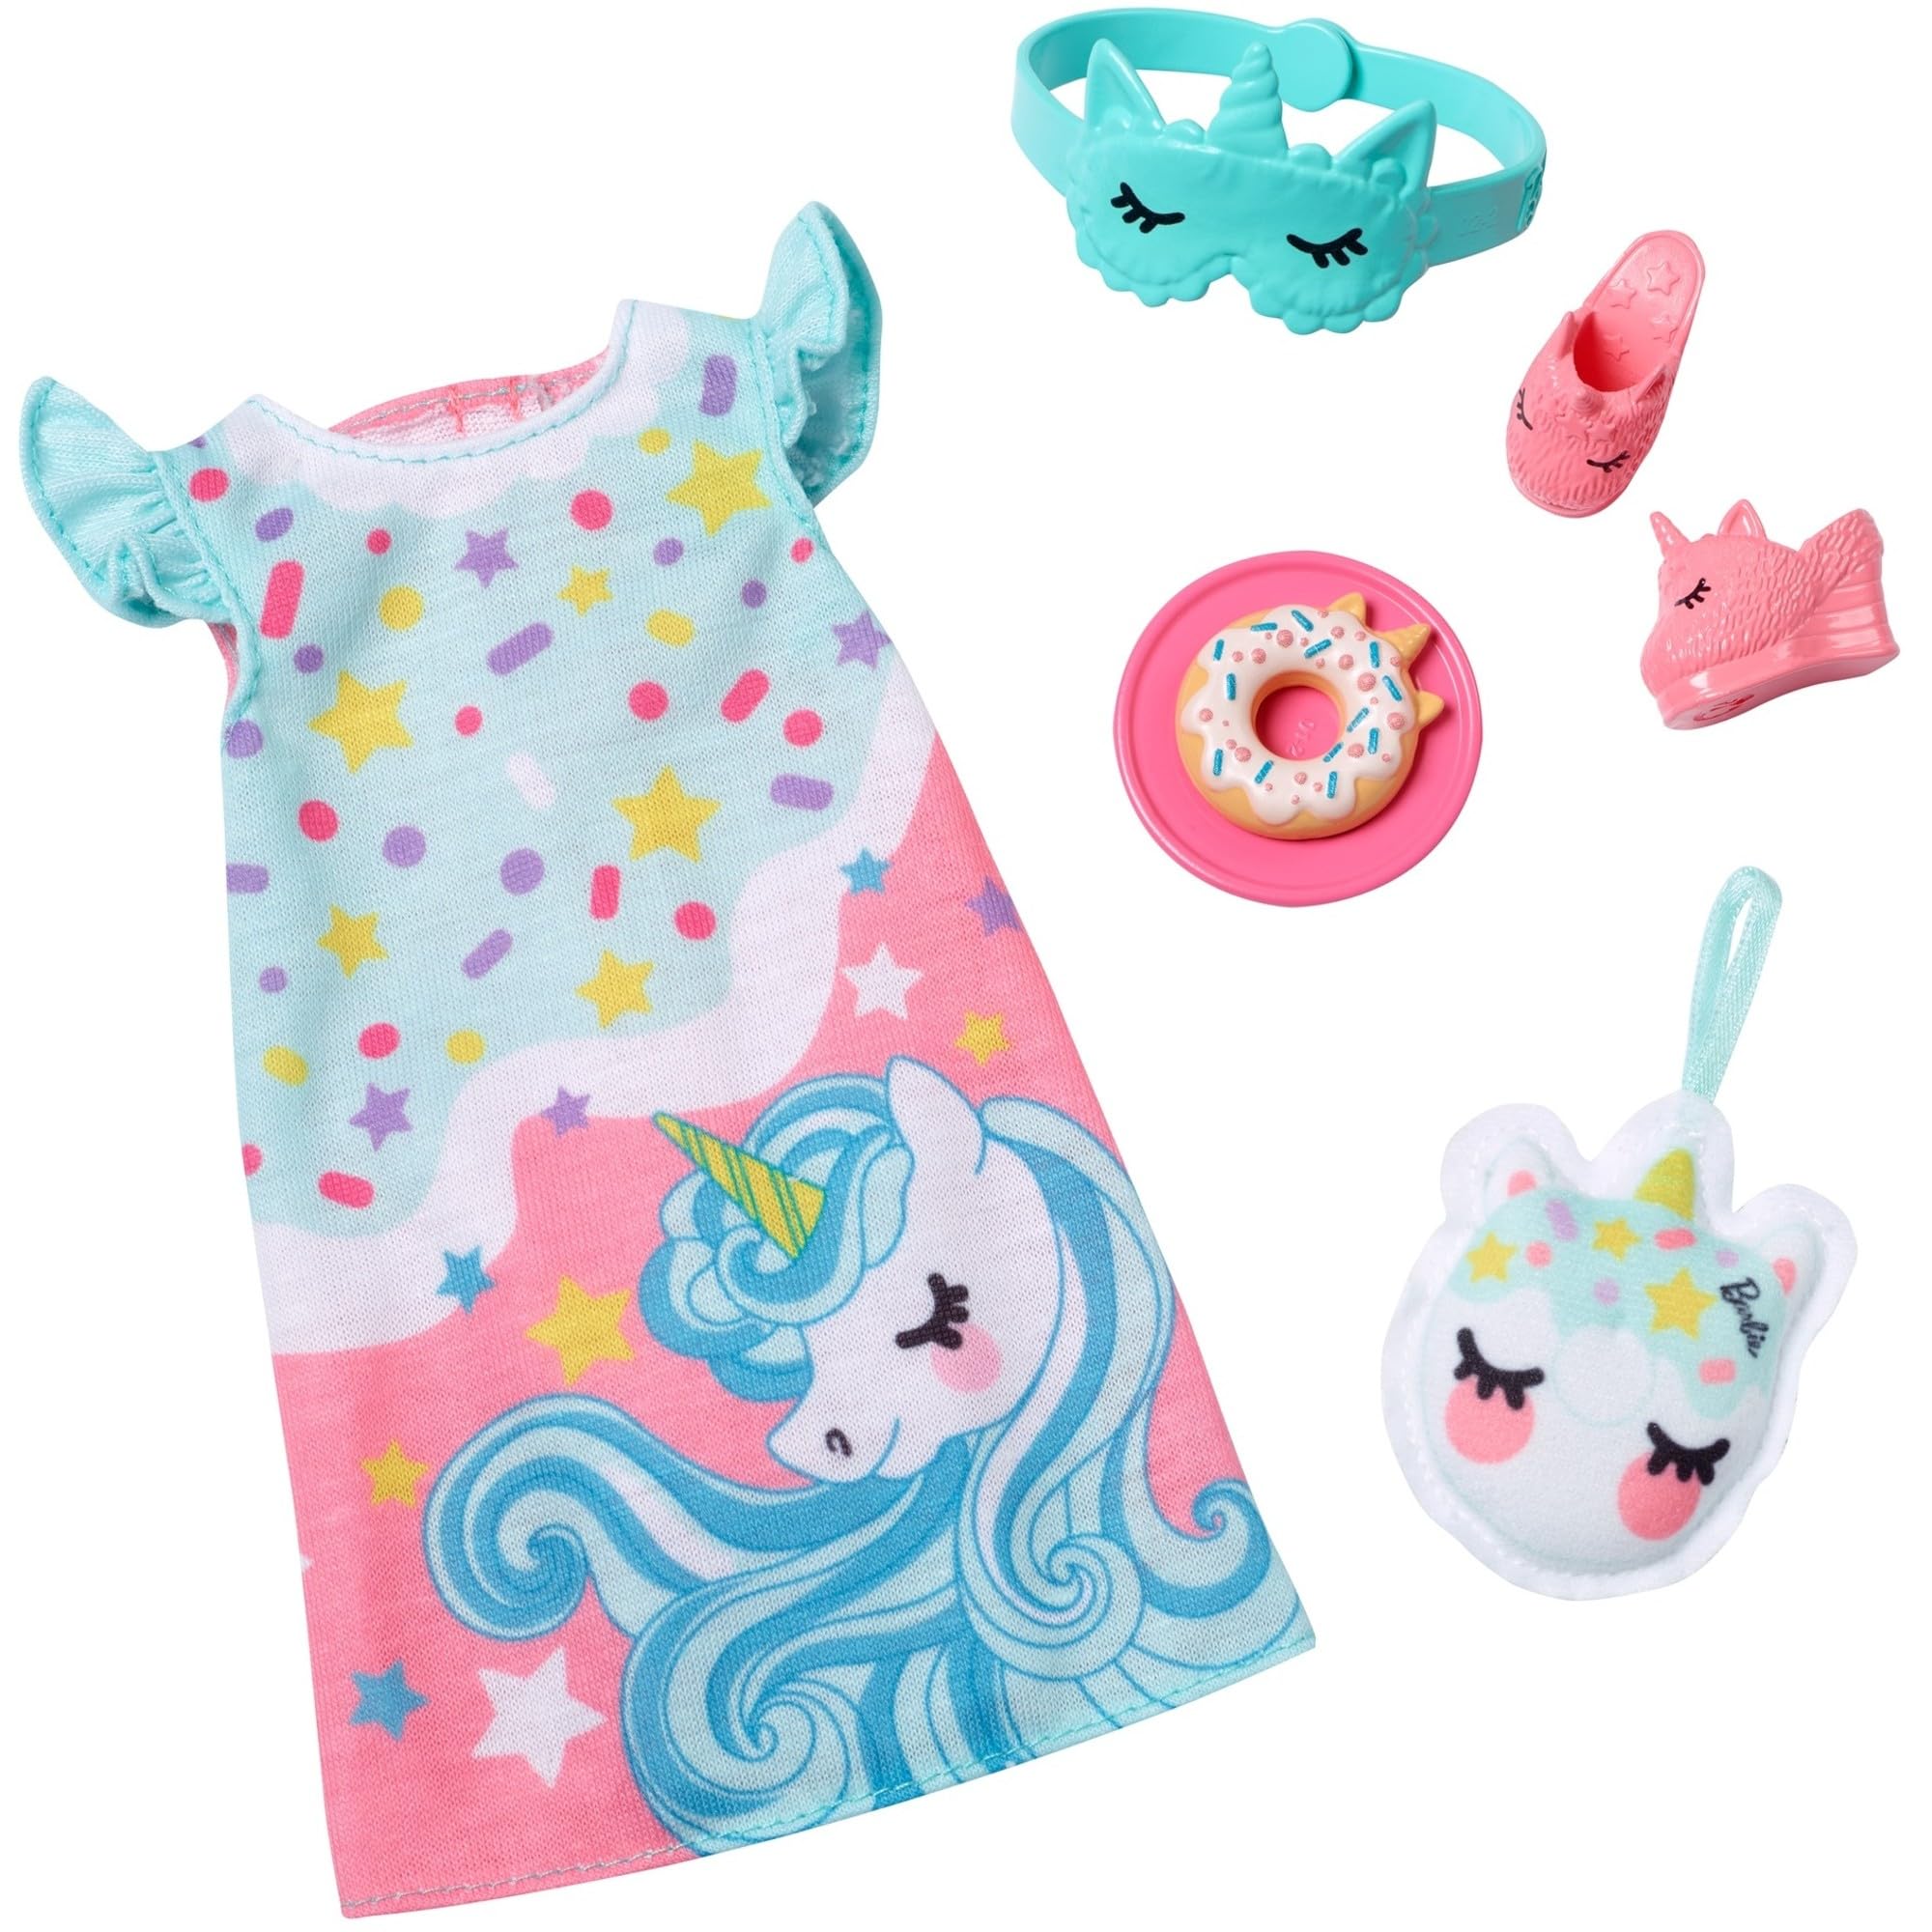 Barbie Clothes, Fashion Pack for 13.5-Inch Preschool Dolls, Pajamas and Slippers with Bedtime Accessories